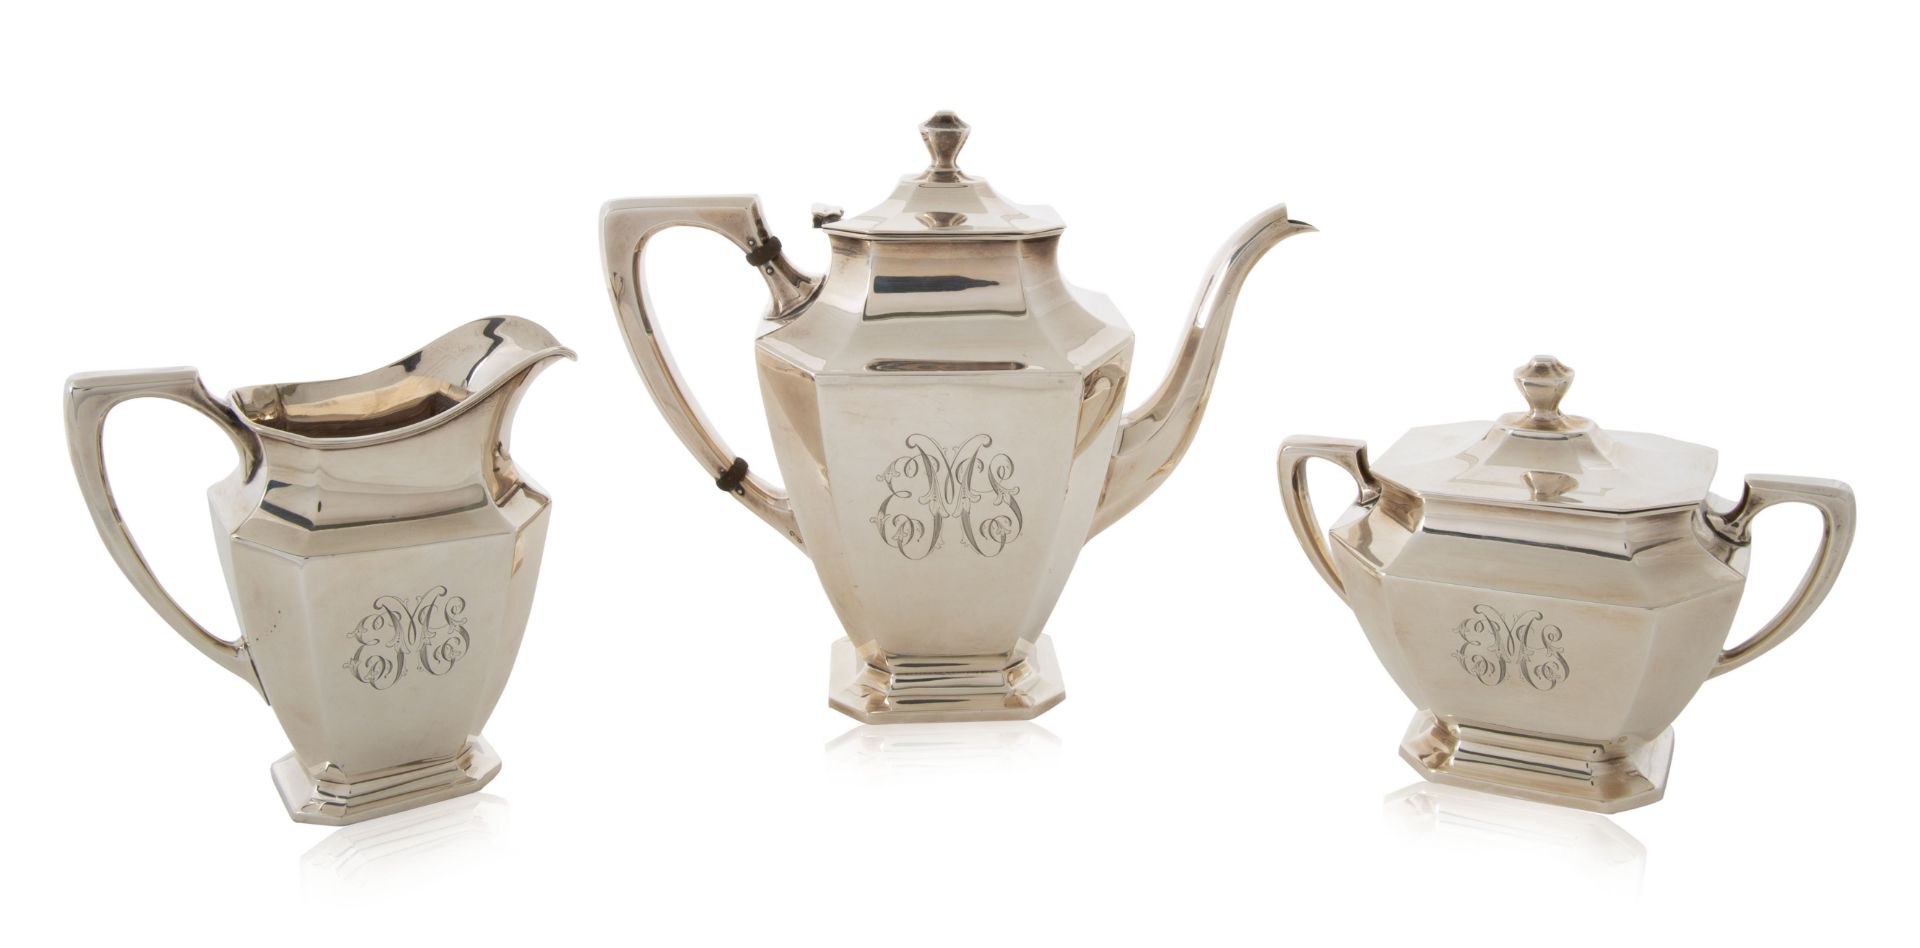 AN AMERICAN THREE-PIECE STERLING SILVER SET, R. WALLACE & SONS CO., 20TH CENTURY - Image 2 of 4